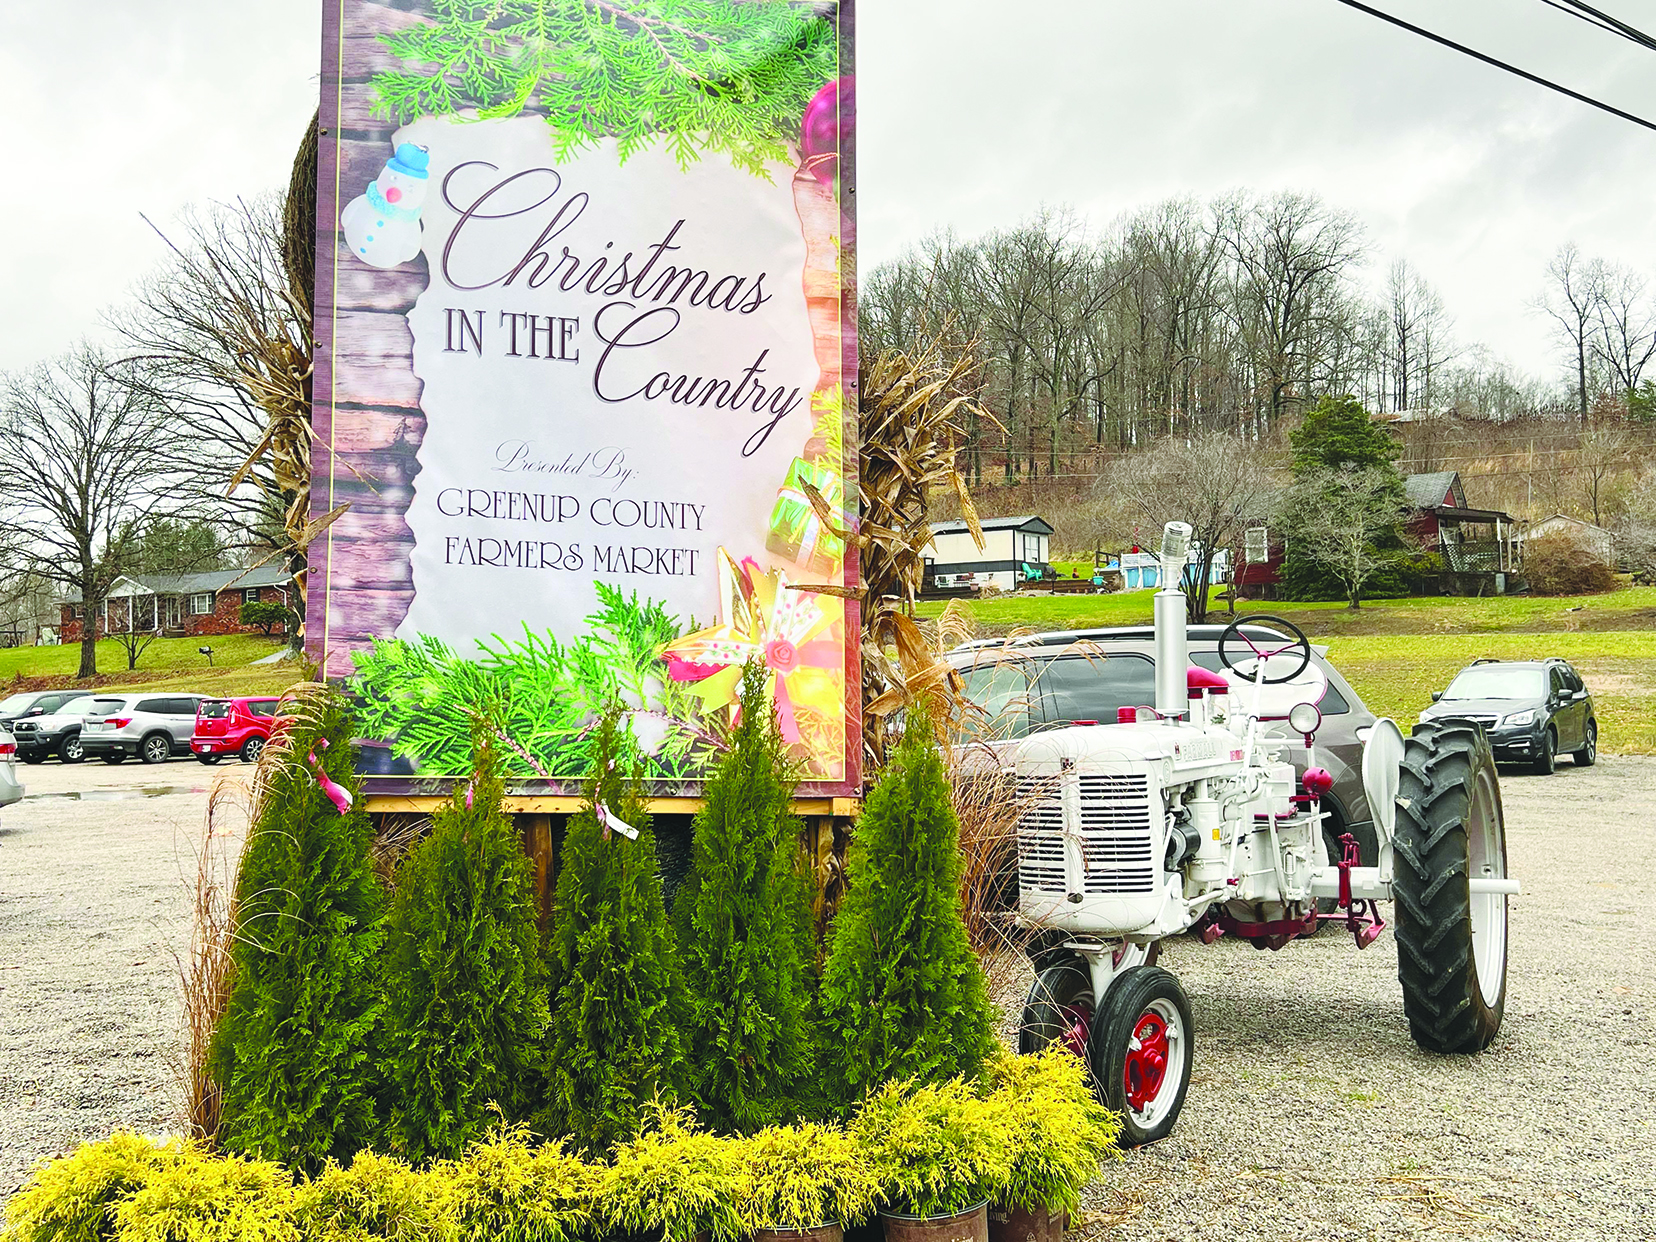 Greenup County Greetings with a Country Christmas